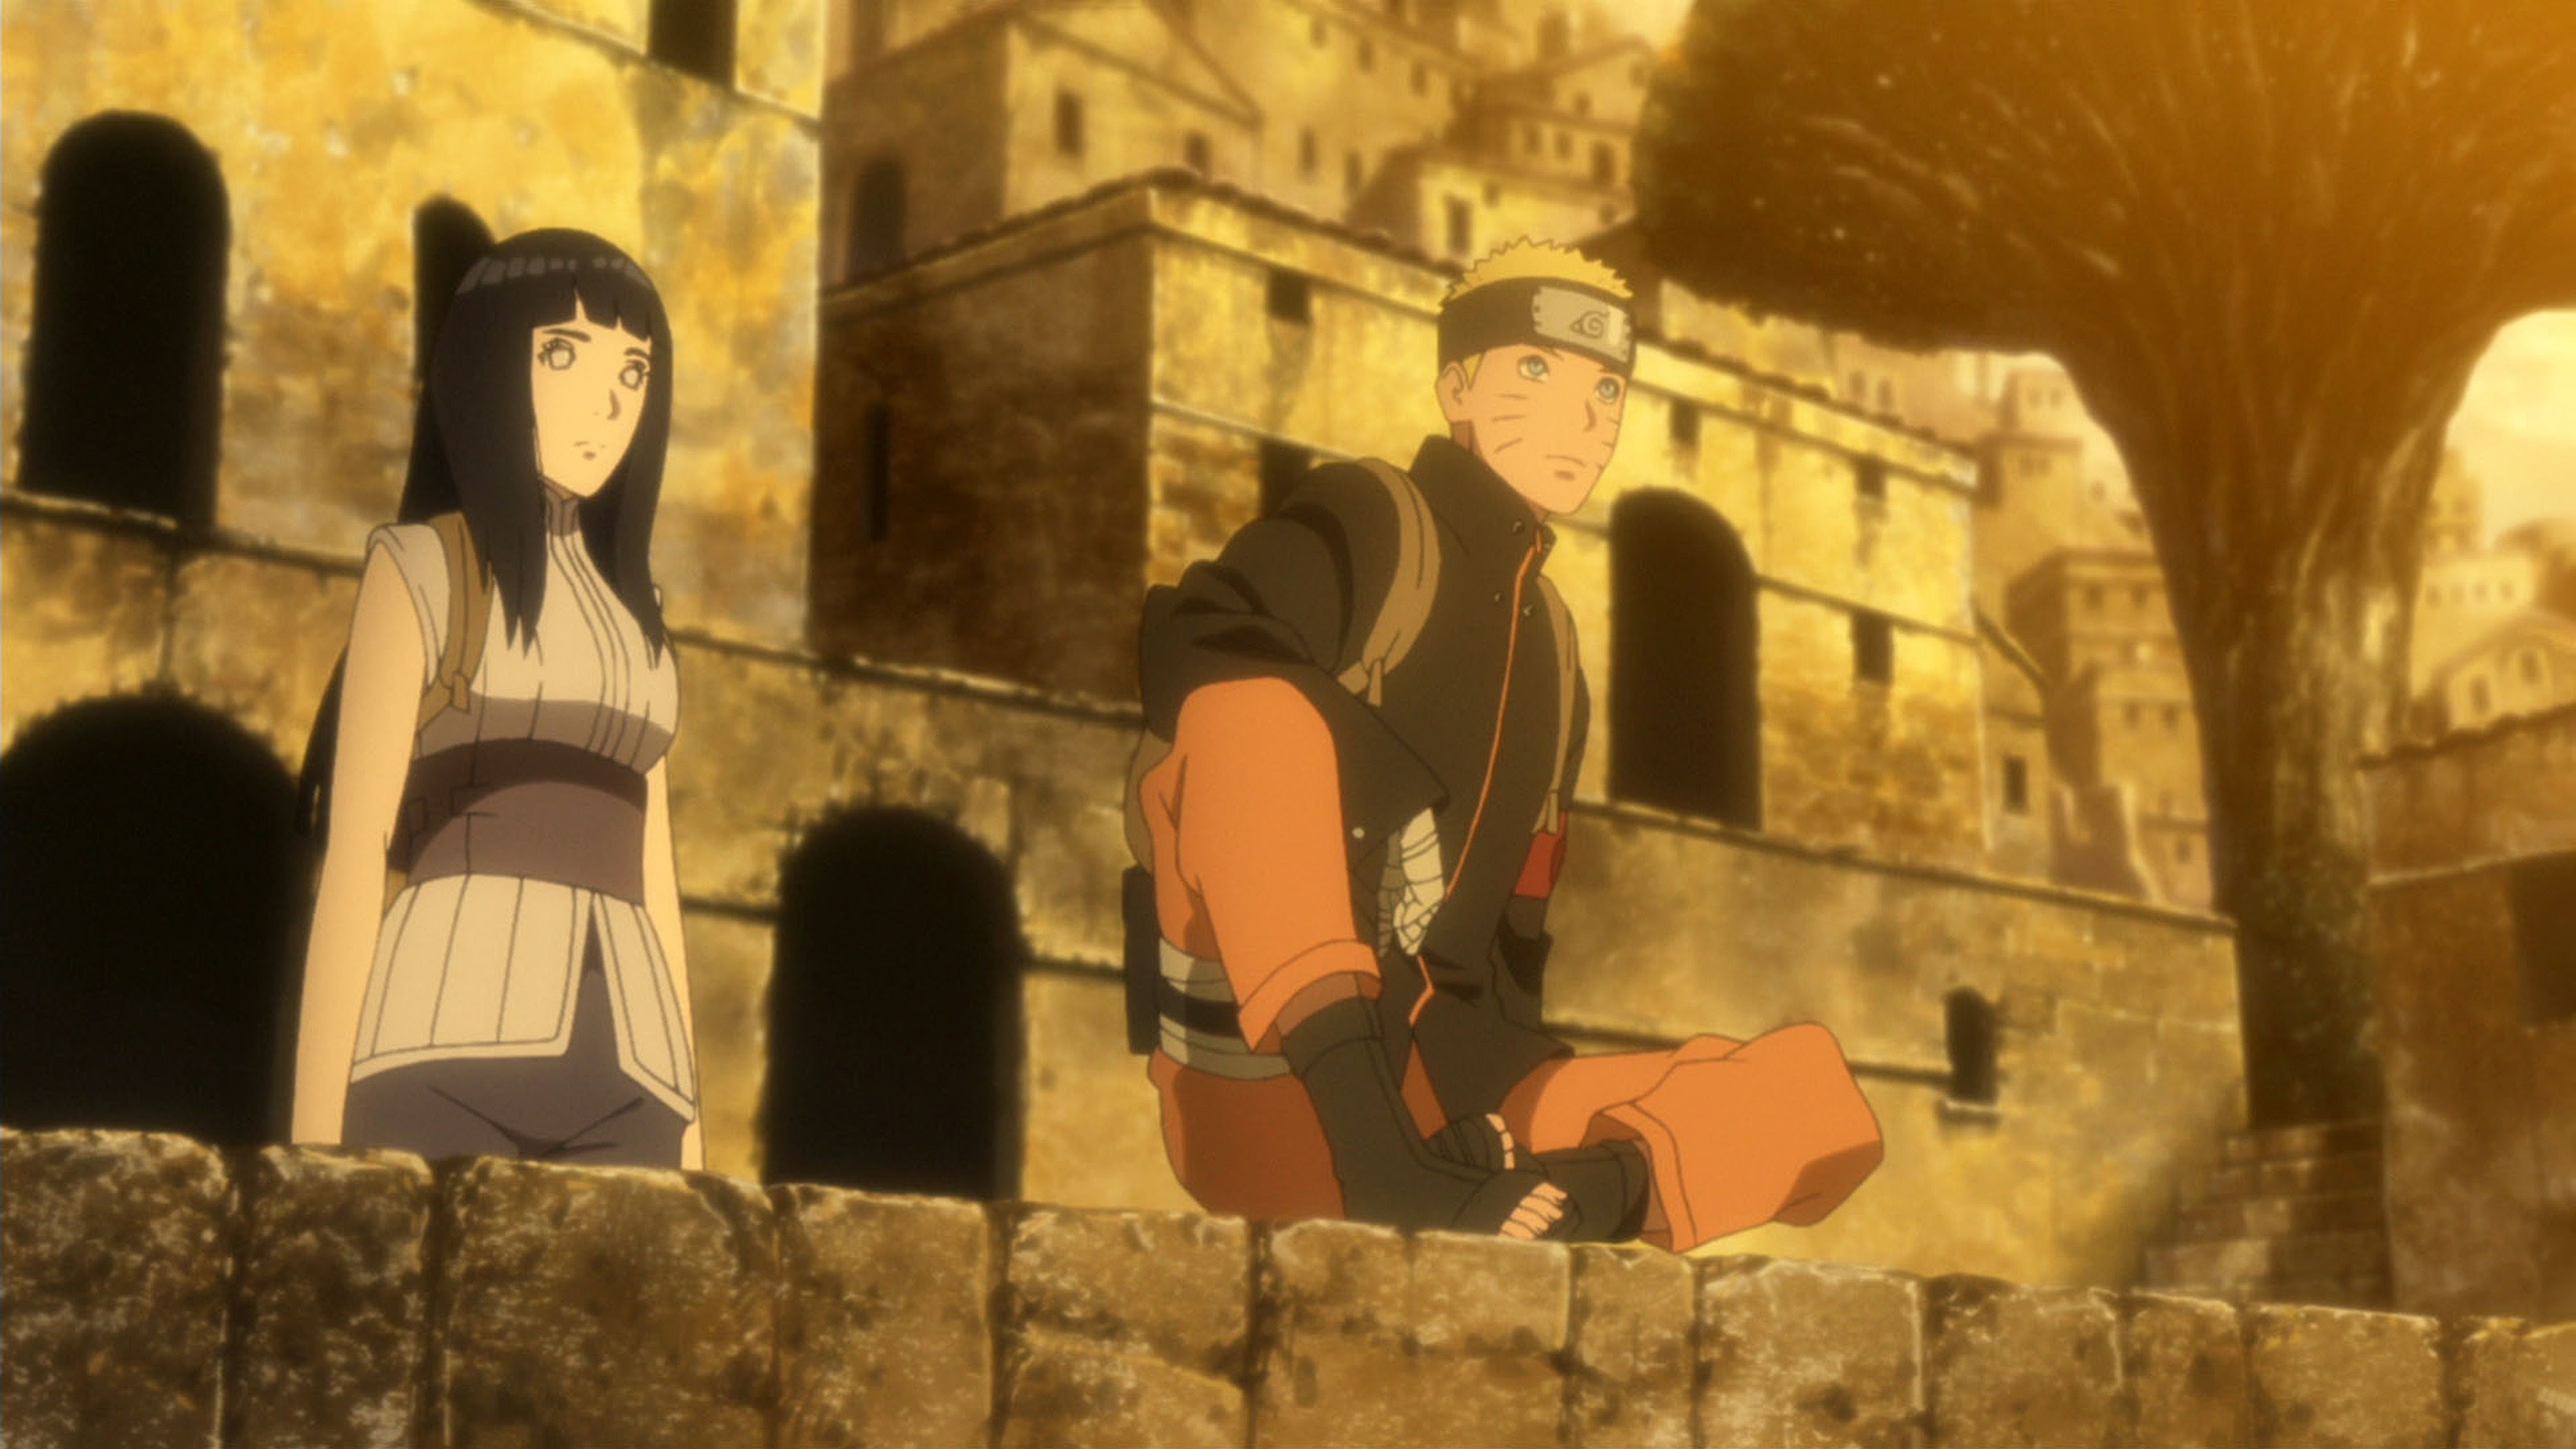 Naruto and a woman are standing together and looking at something in the distance.